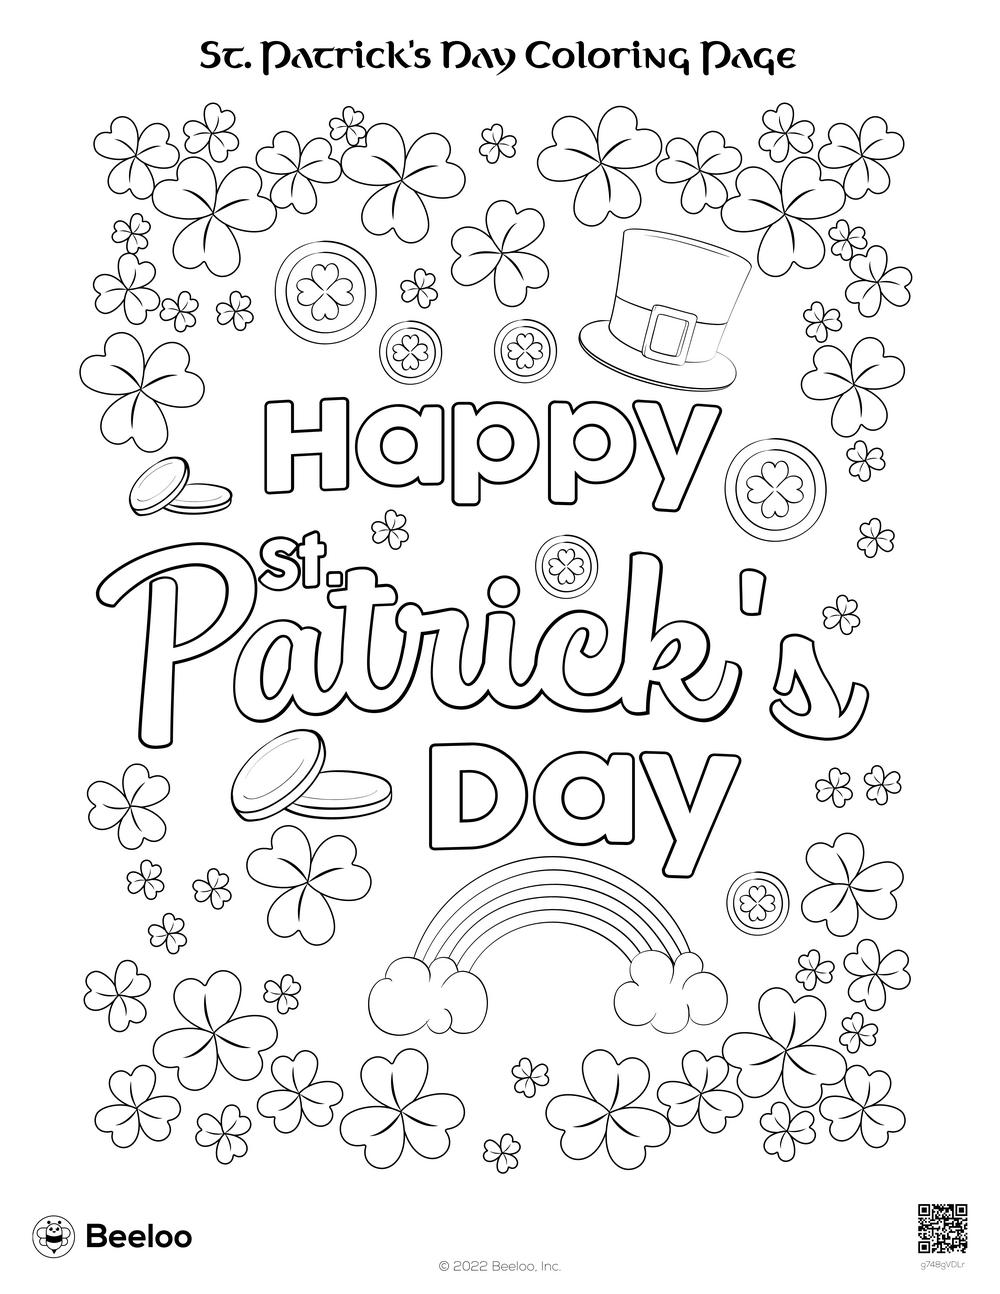 St patricks day coloring page â printable crafts and activities for kids